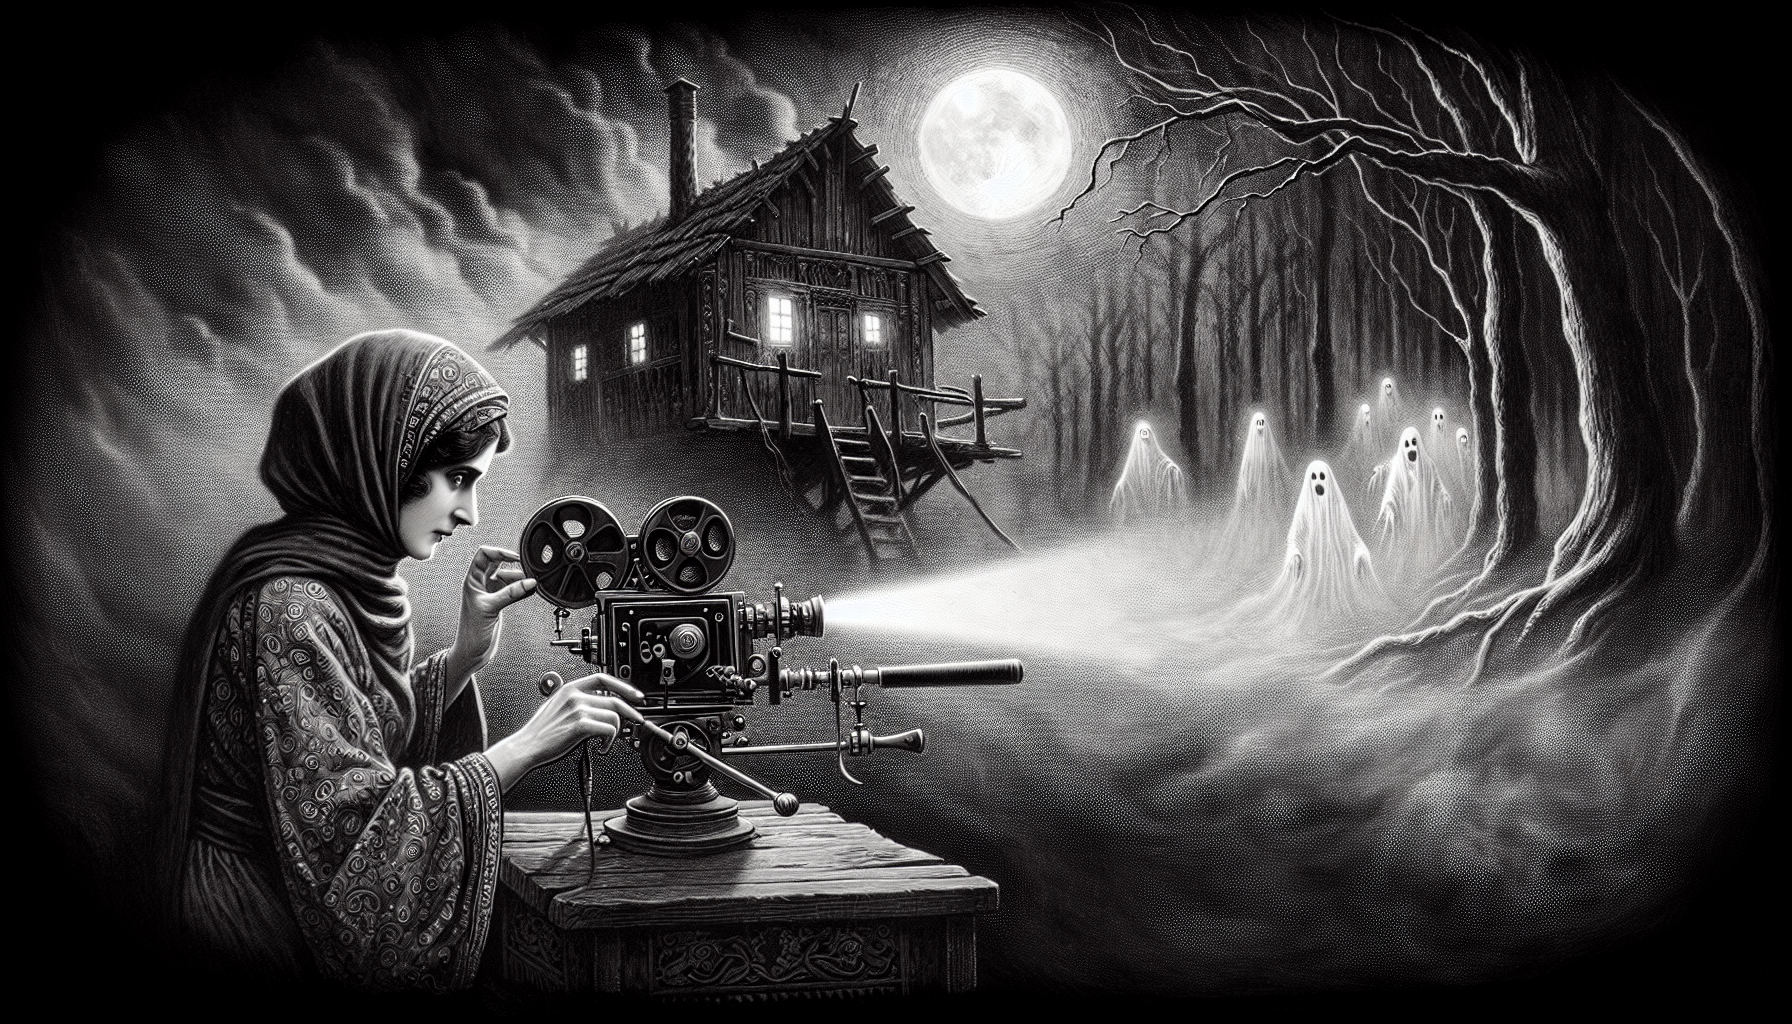 A striking and haunting image of a dark, foggy film set with a skilled director positioning a camera to capture a terrifying scene featuring ghostly figures emerging from an old, creaky wooden house,